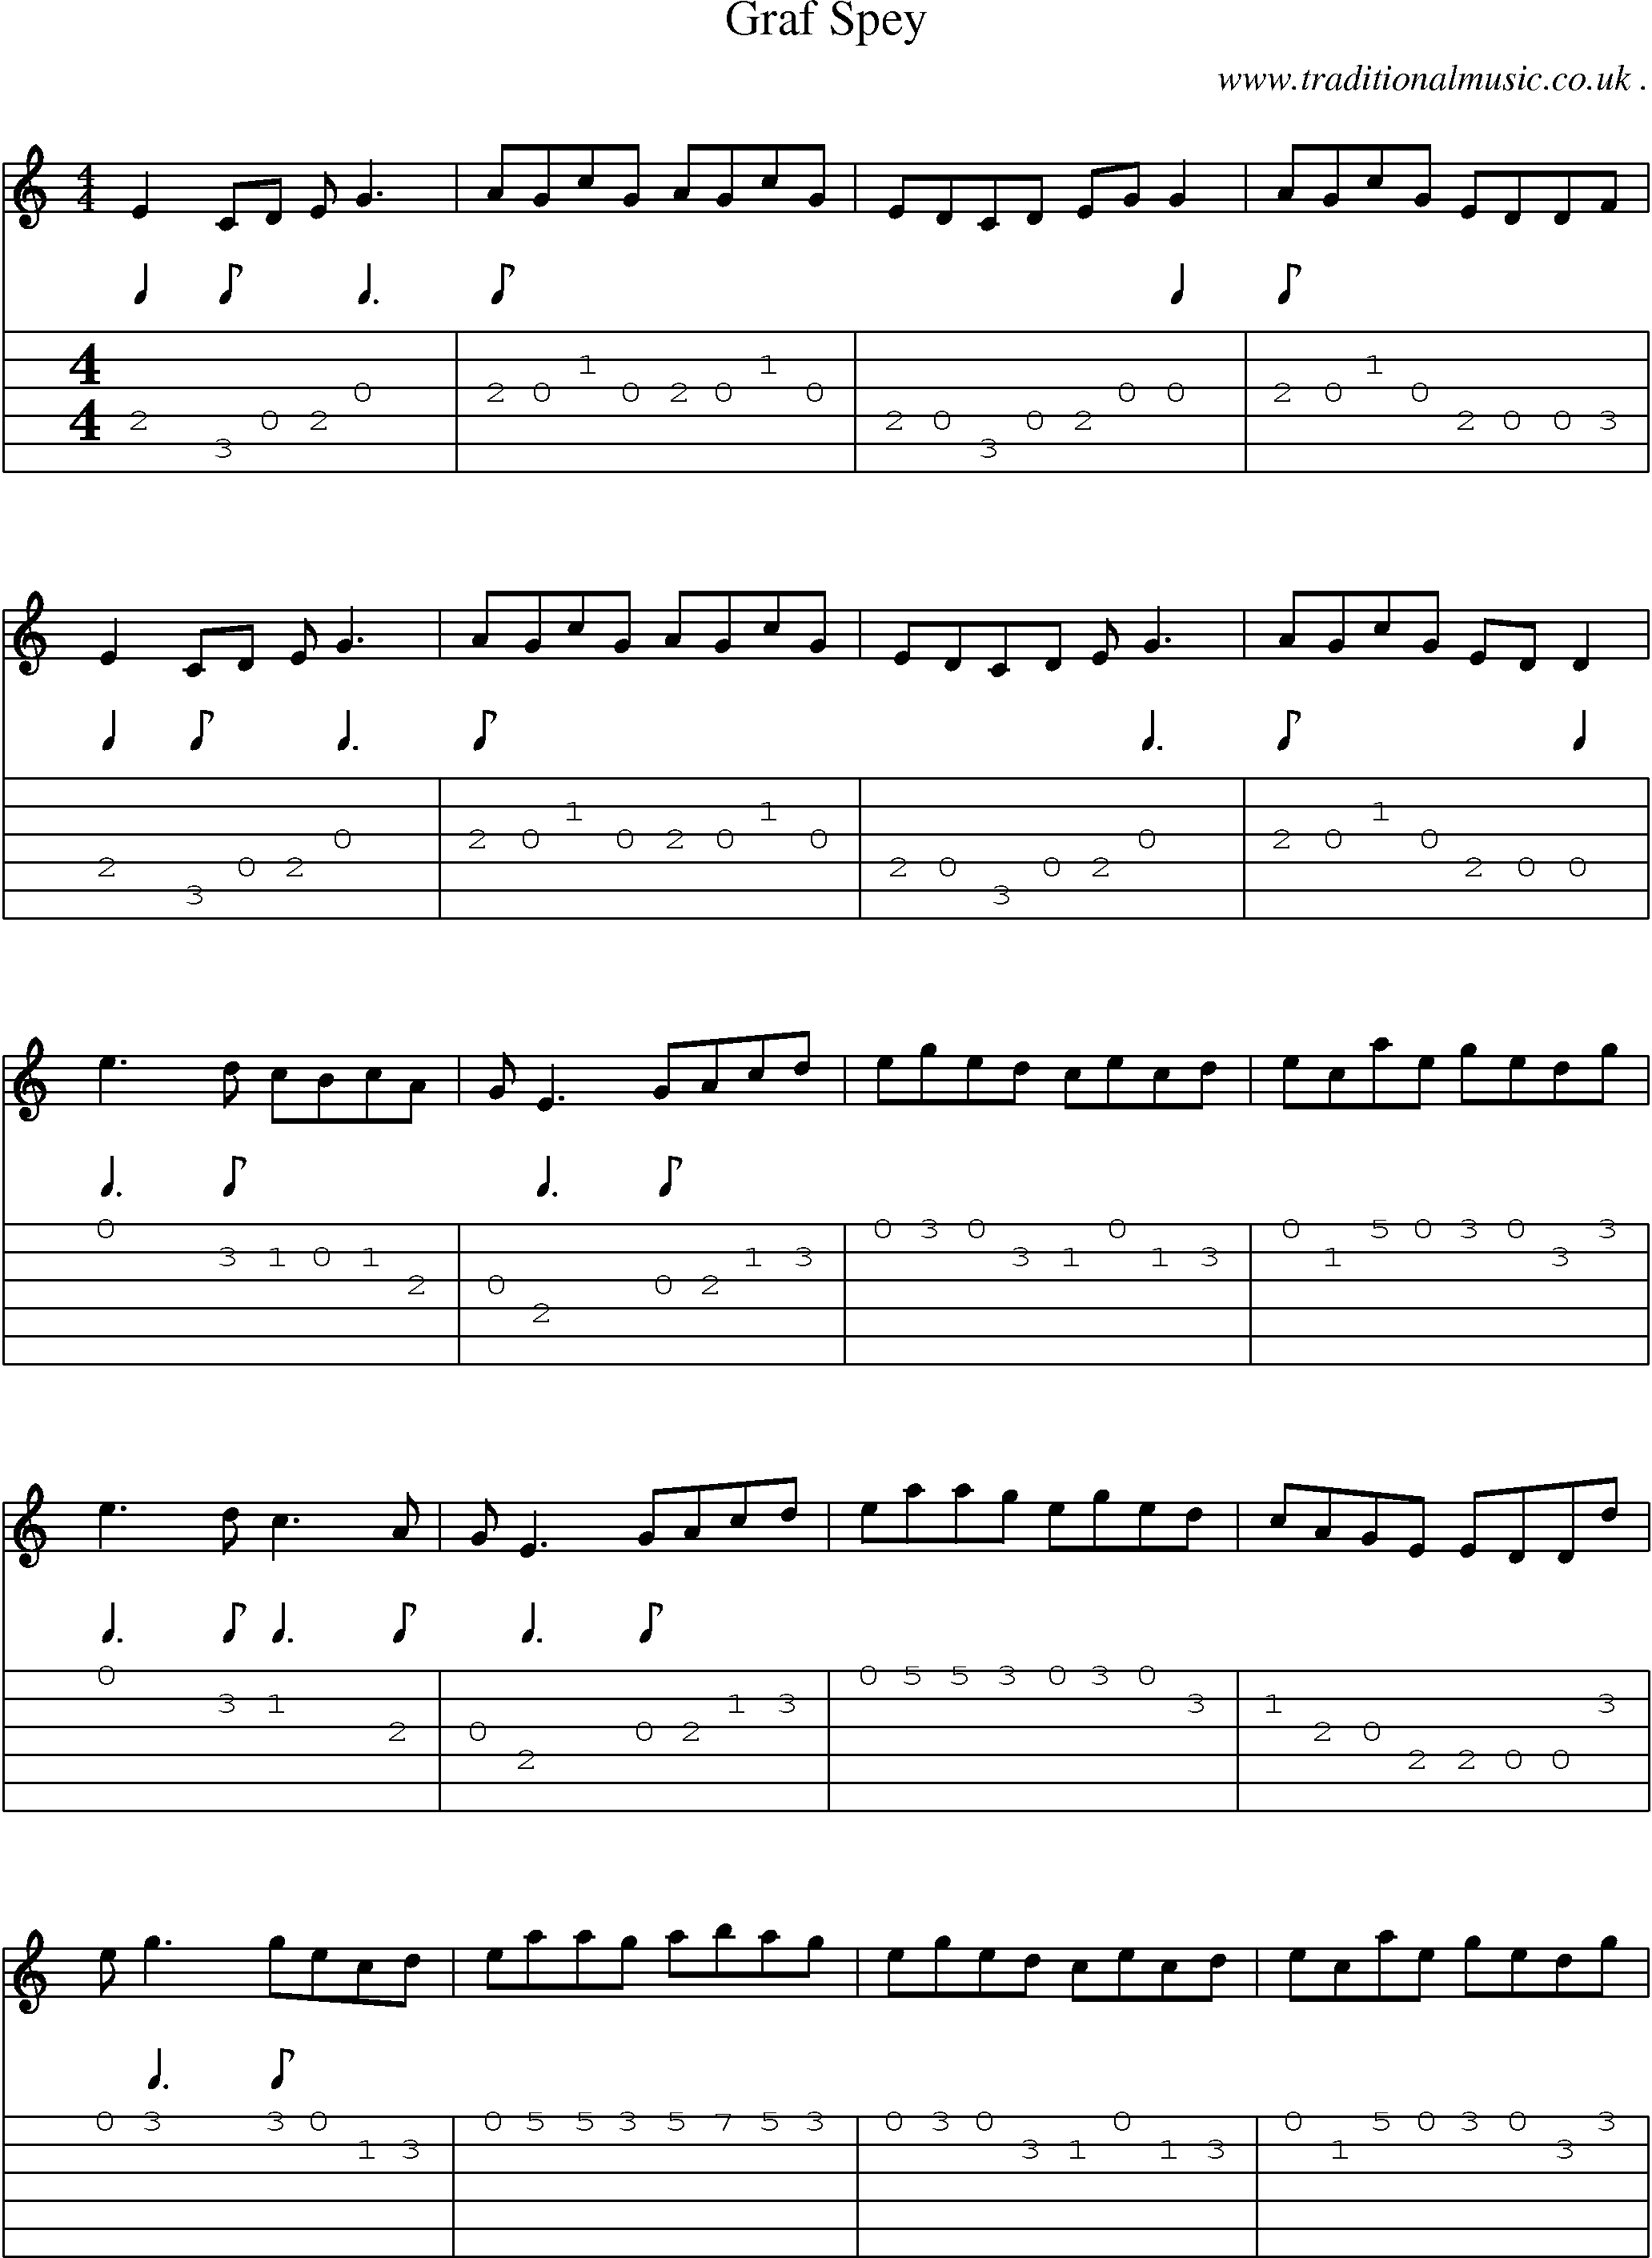 Sheet-Music and Guitar Tabs for Graf Spey